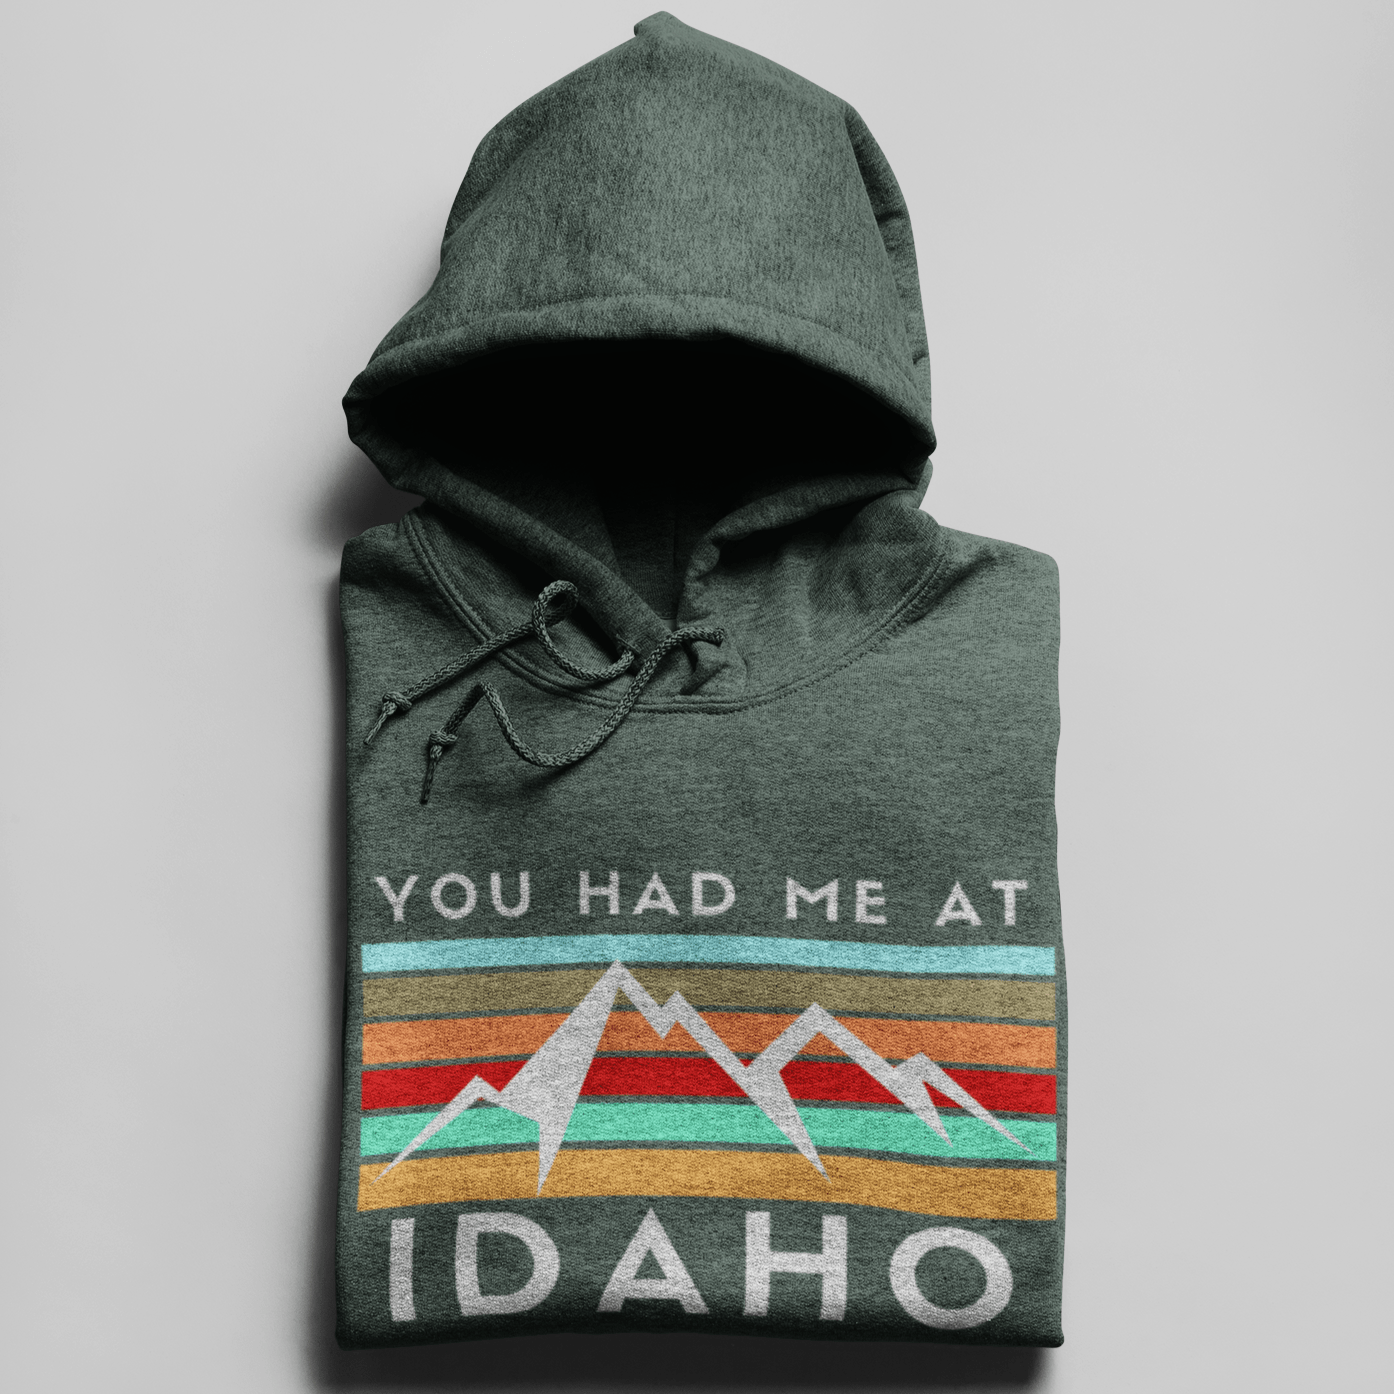 208 Supply Co sweatshirts Small / Heather Forest You Had Me At Idaho Unisex Midweight Hoodie